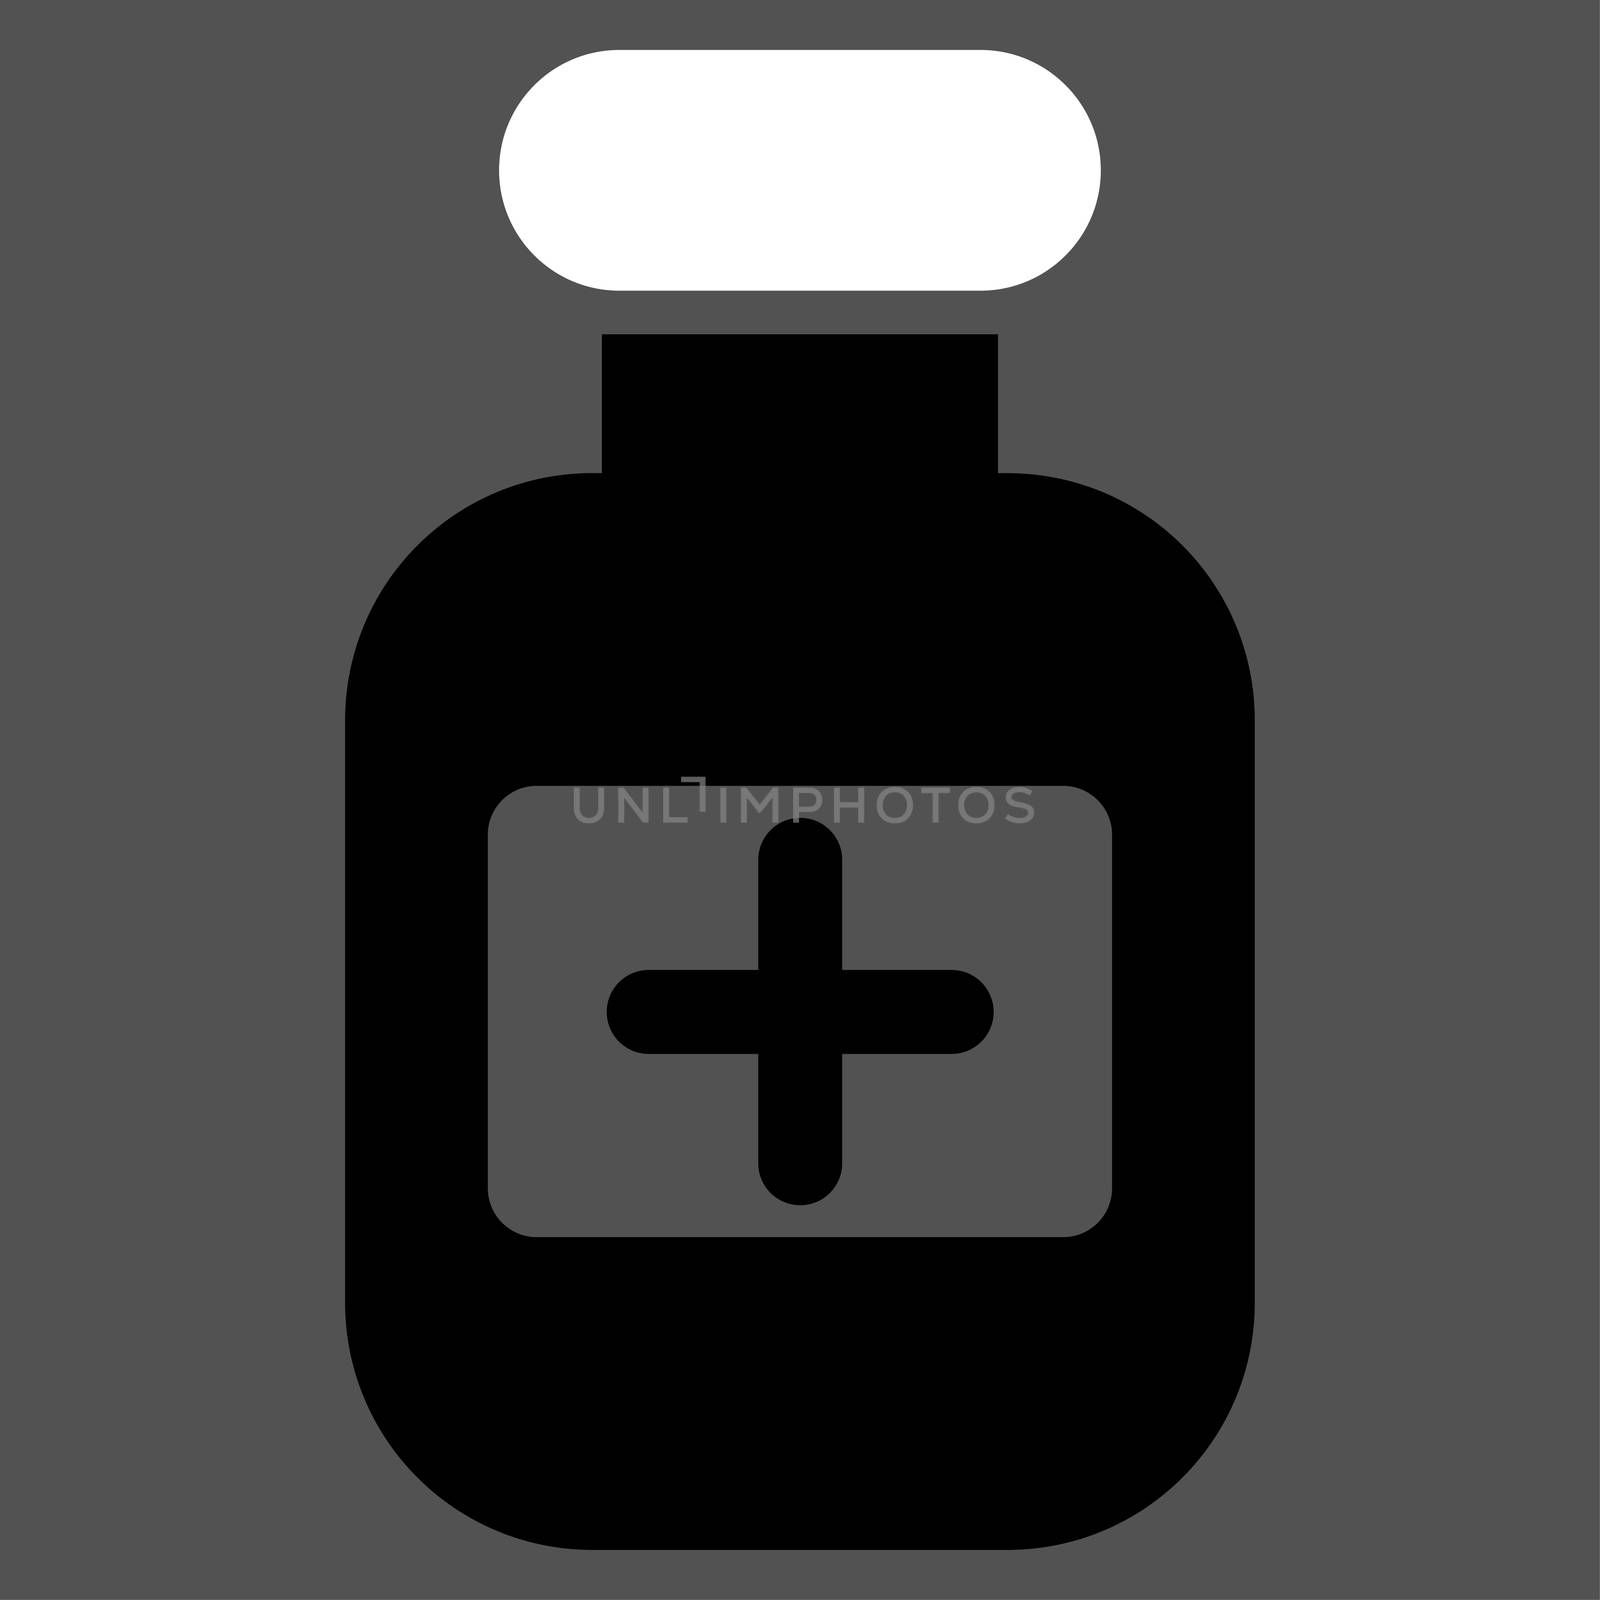 Drugs Bottle raster icon. Style is bicolor flat symbol, black and white colors, rounded angles, gray background.